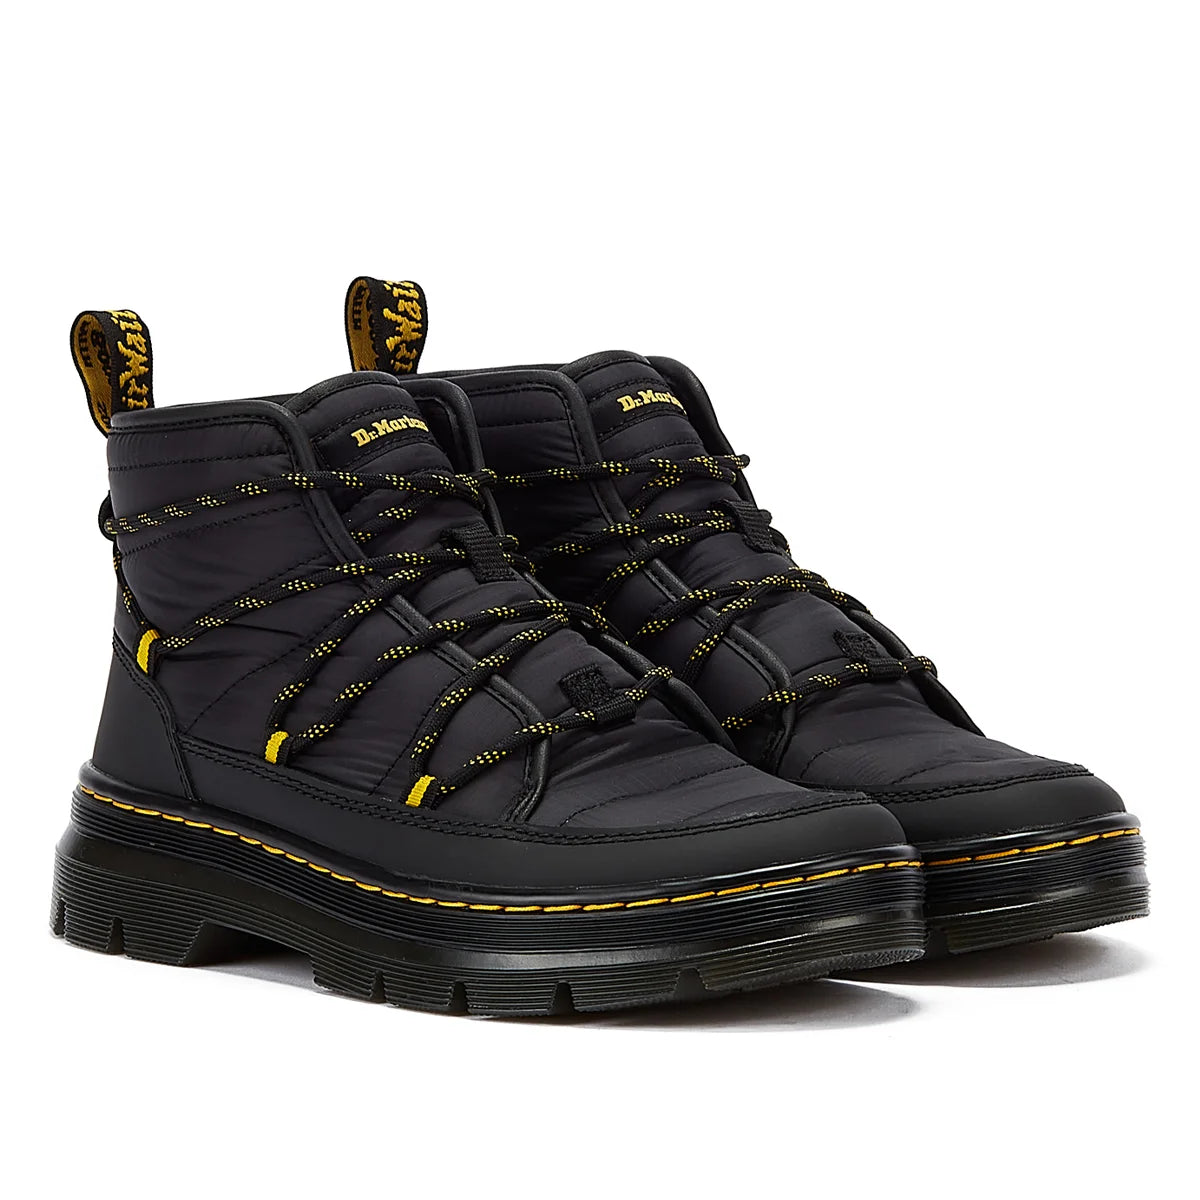 Dr. Martens Combs Padded Quilted Women’s Black Boots